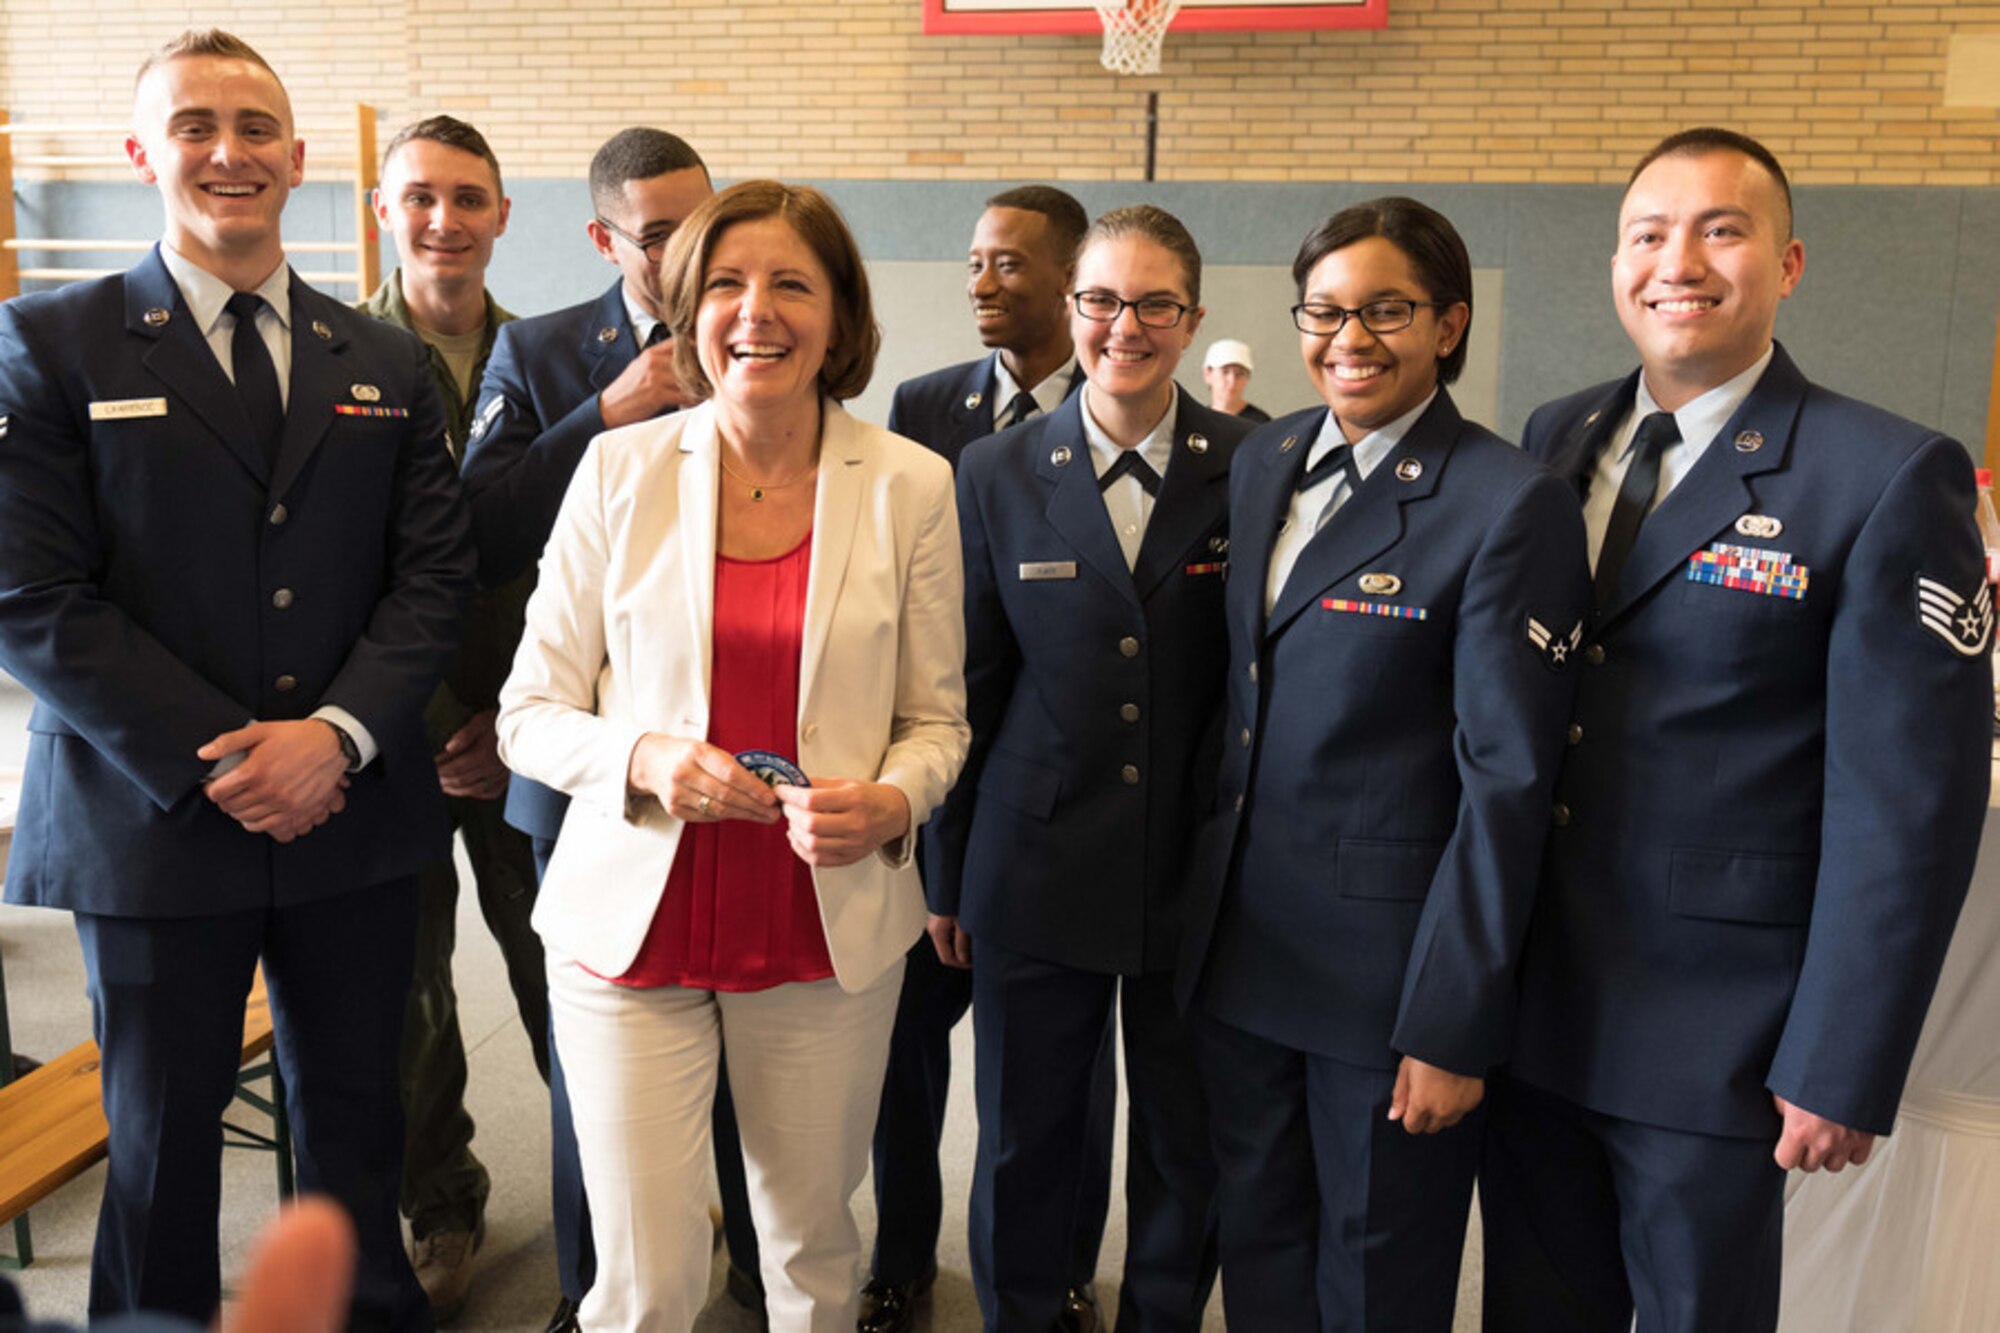 Malu Dreyer, minister-president for Rheinland-Pfalz, center left, smiles with U.S. Air Force Airmen and Soldiers stationed in Germany during a youth reception at the 33rd annual Rheinland-Pfalz state fair in Alzey, Germany, June 3, 2016. Five Airmen assigned to Spangdahlem Air Base, Germany, participated in the reception where Dreyer highlighted the accomplishments and partnership among the state communities. (Staatskanzlei Rheinland-Pfalz/Herbert Piel)